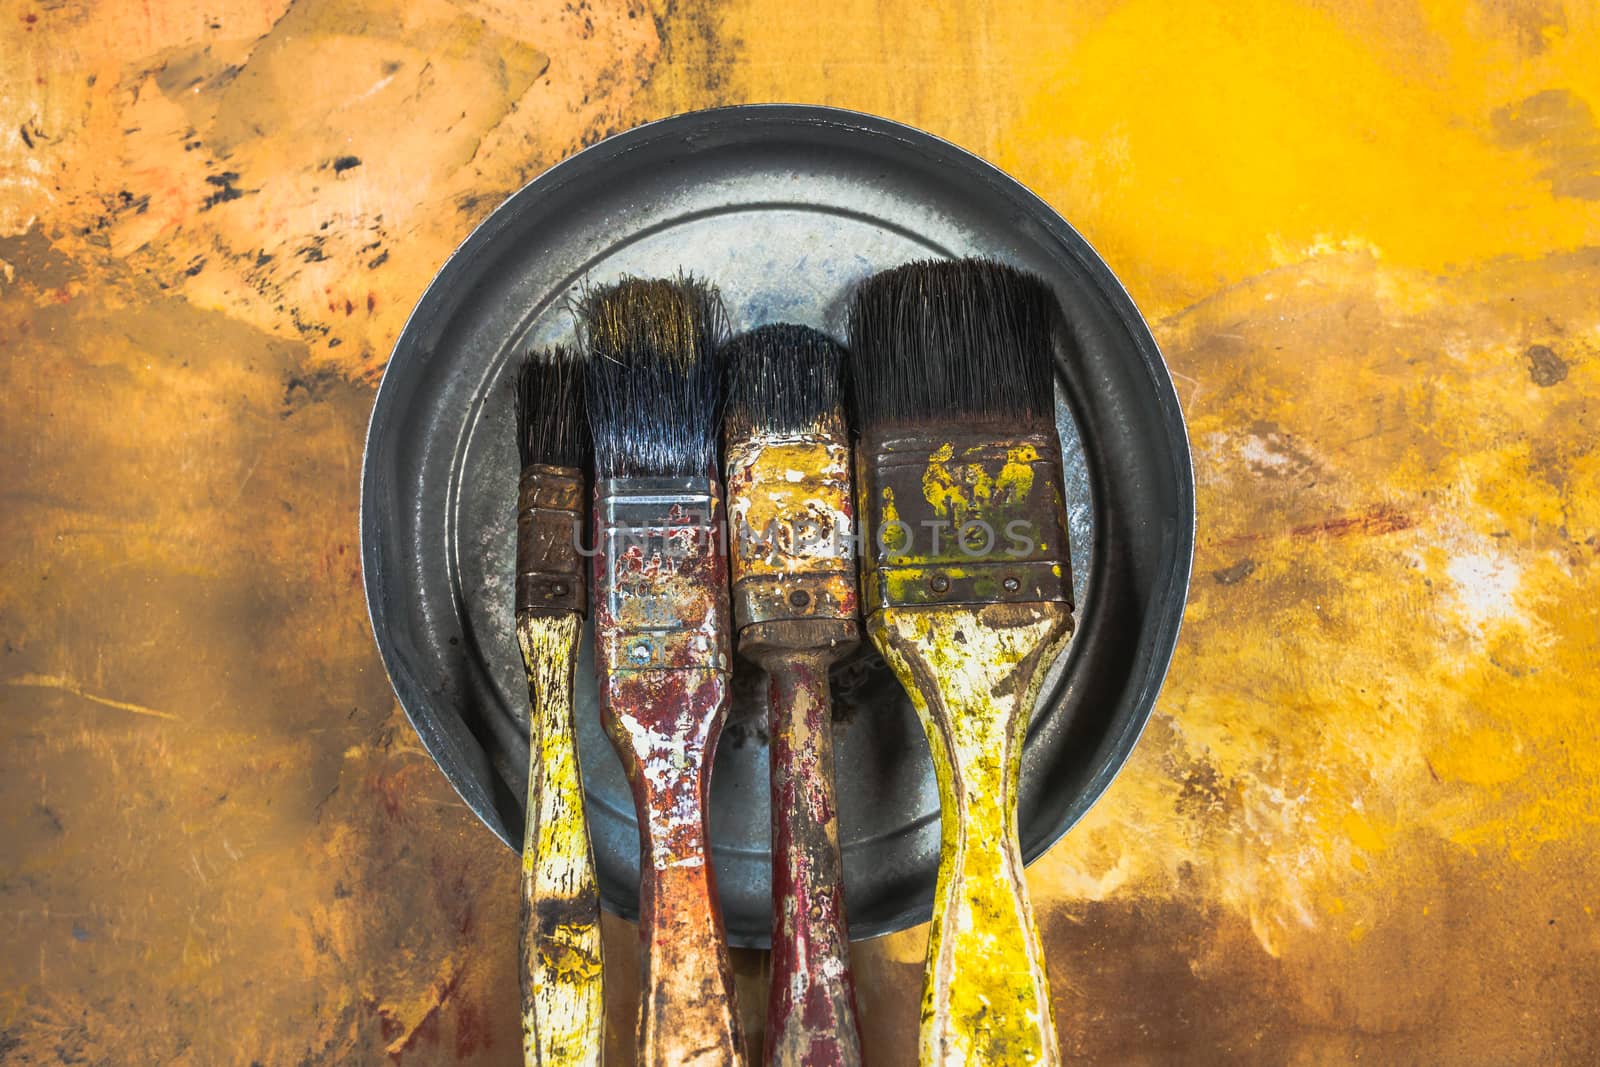 Oil paint brushes on wood painted background by nopparats